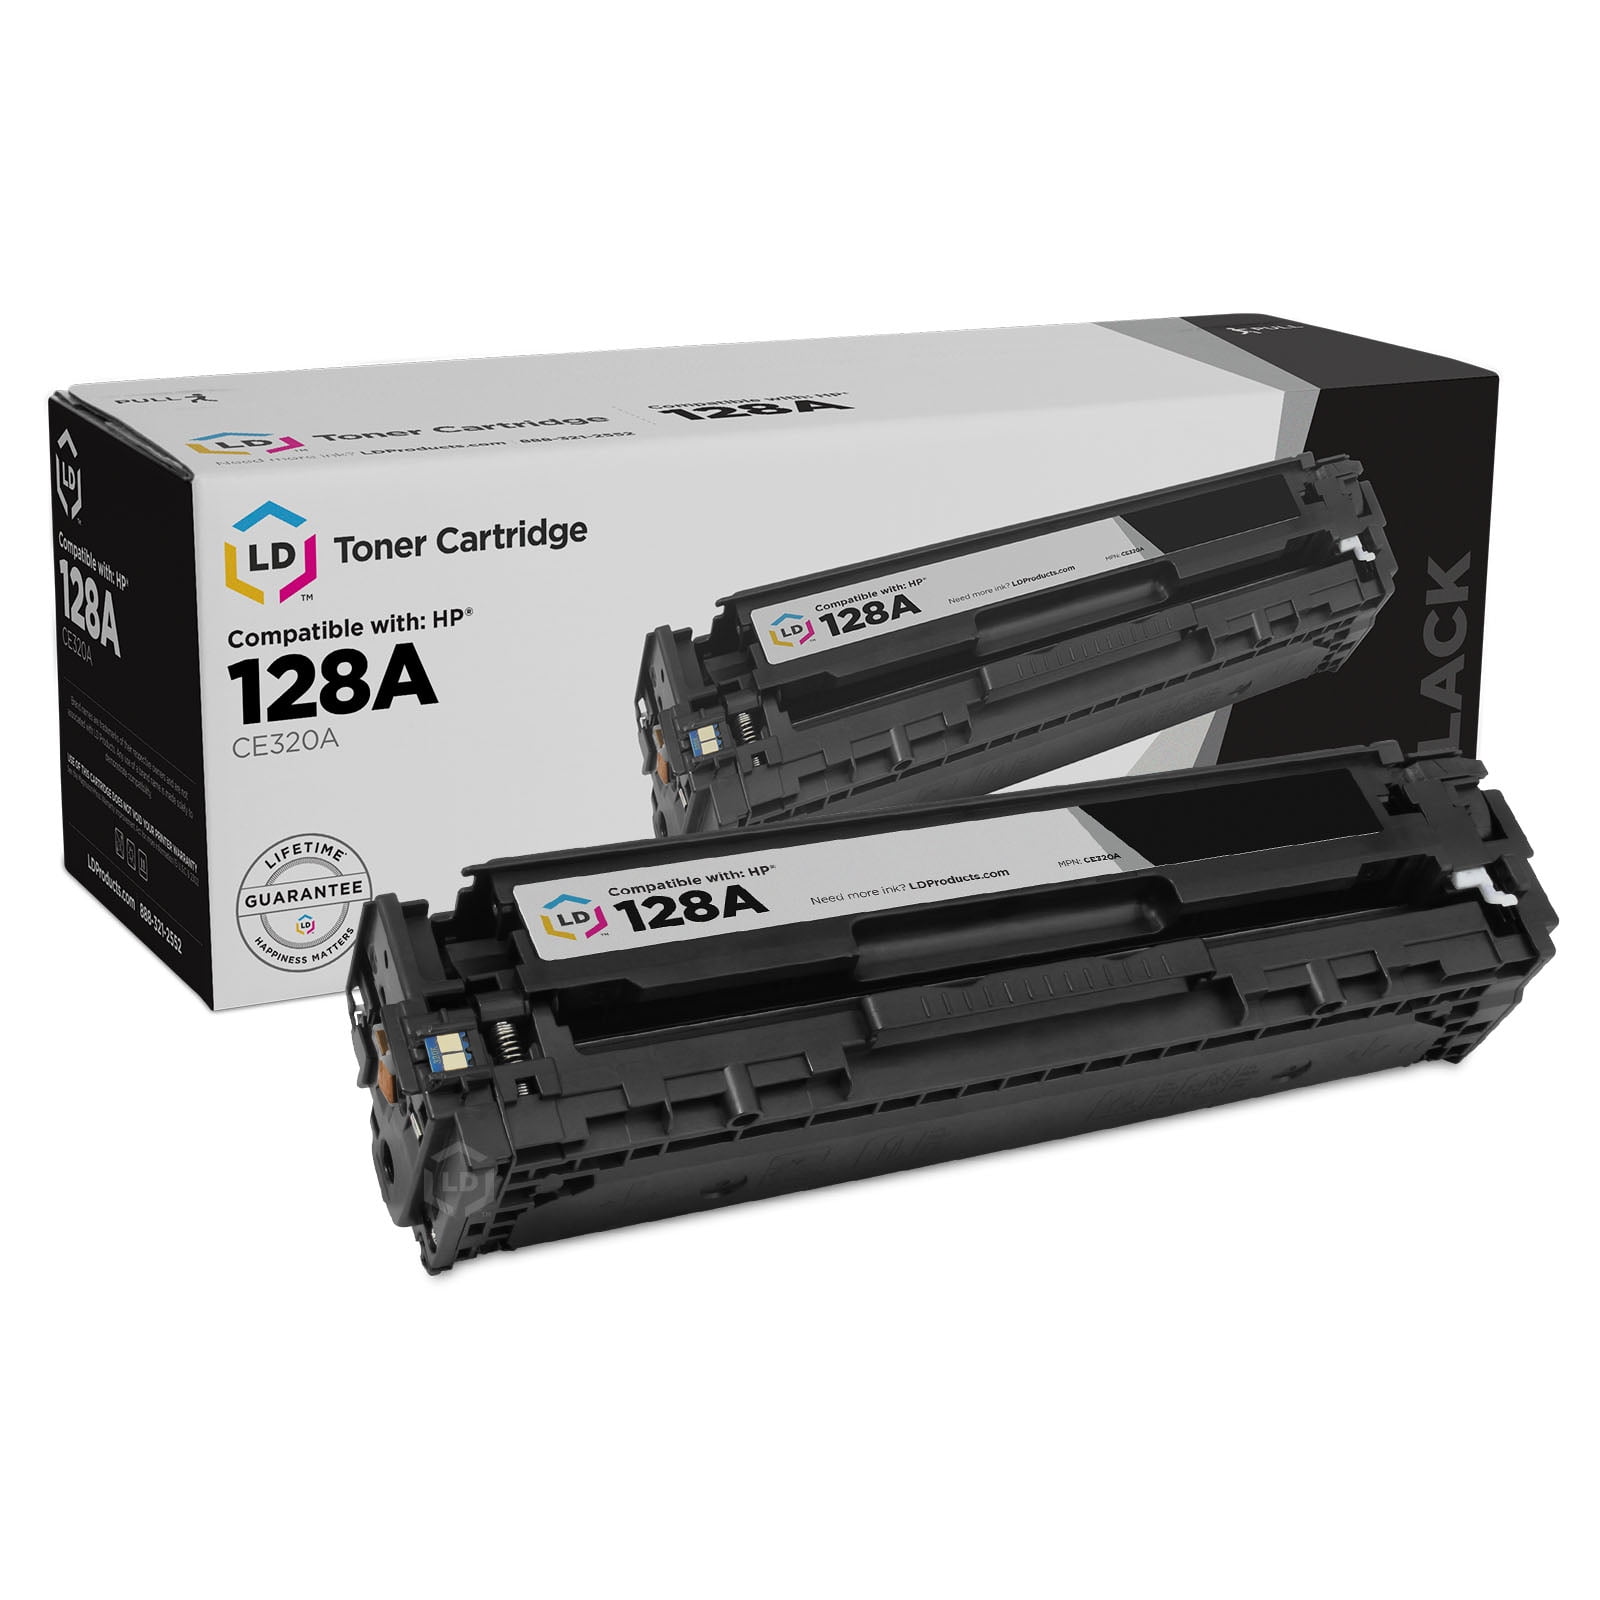 Black, 2-Pack LD Remanufactured Toner Cartridge Replacement for HP 128A CE320A 